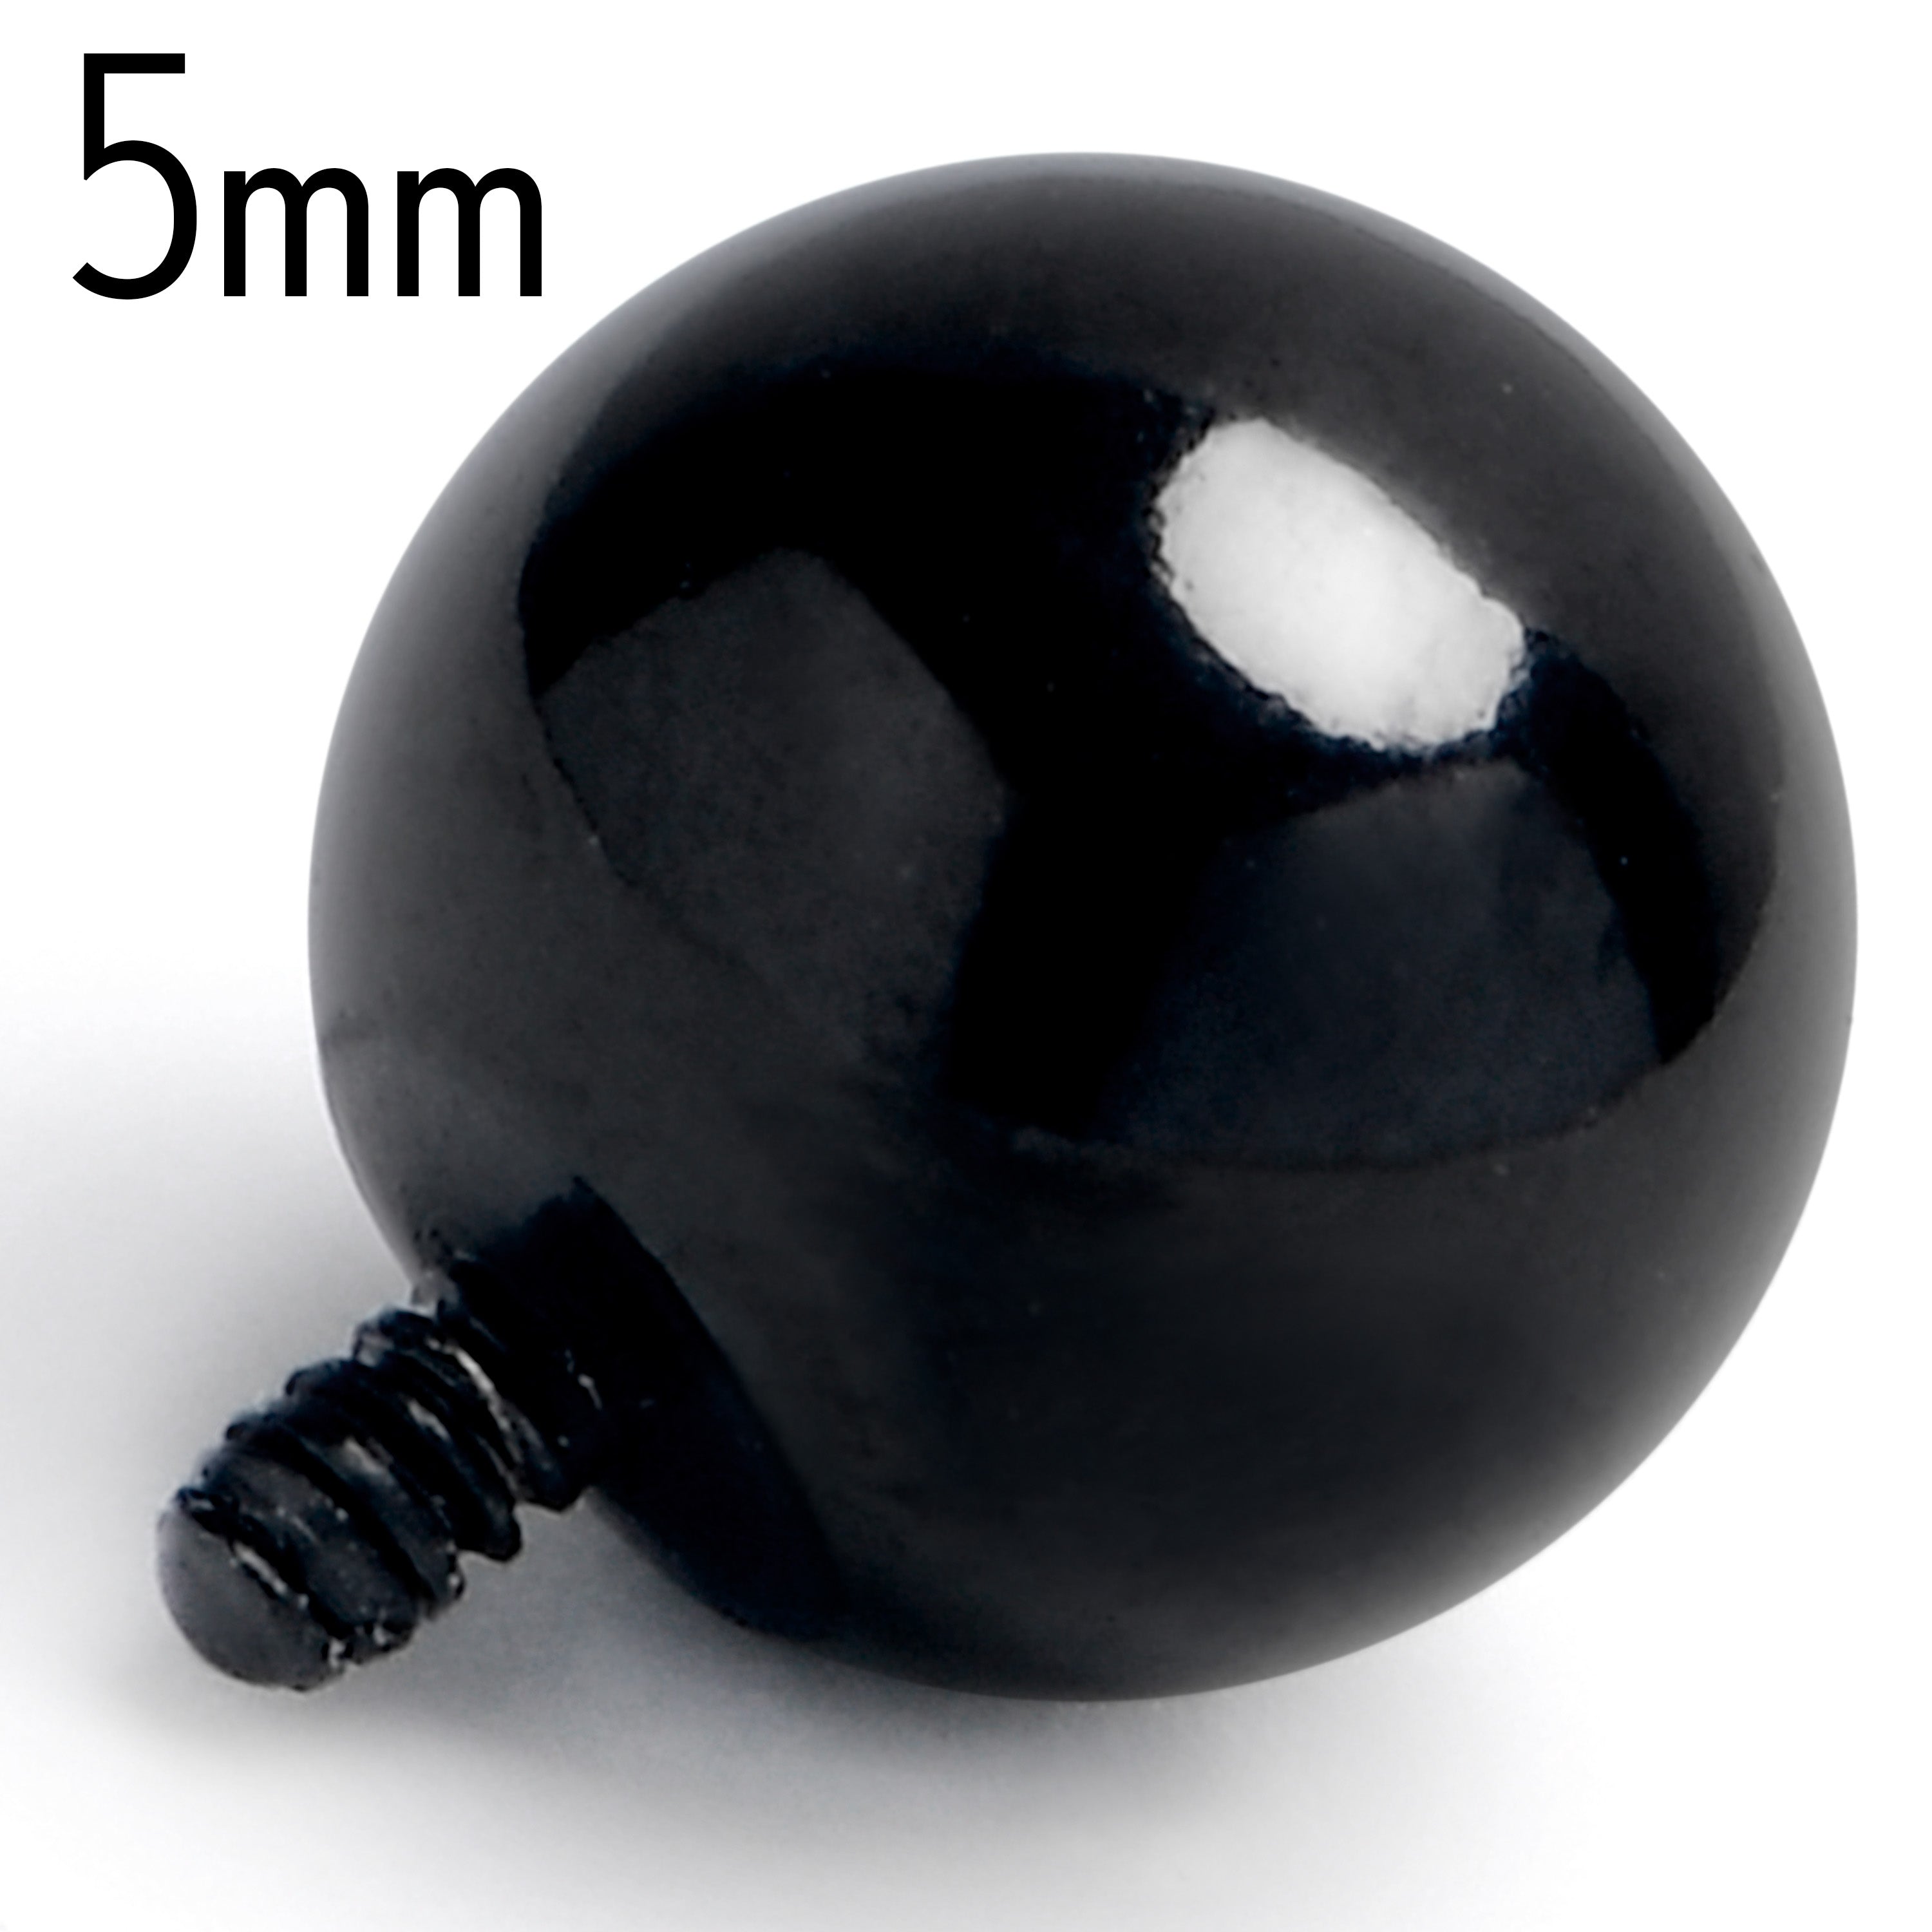 16 Gauge 5mm Black Replacement Ball End Internally Threaded Jewelry